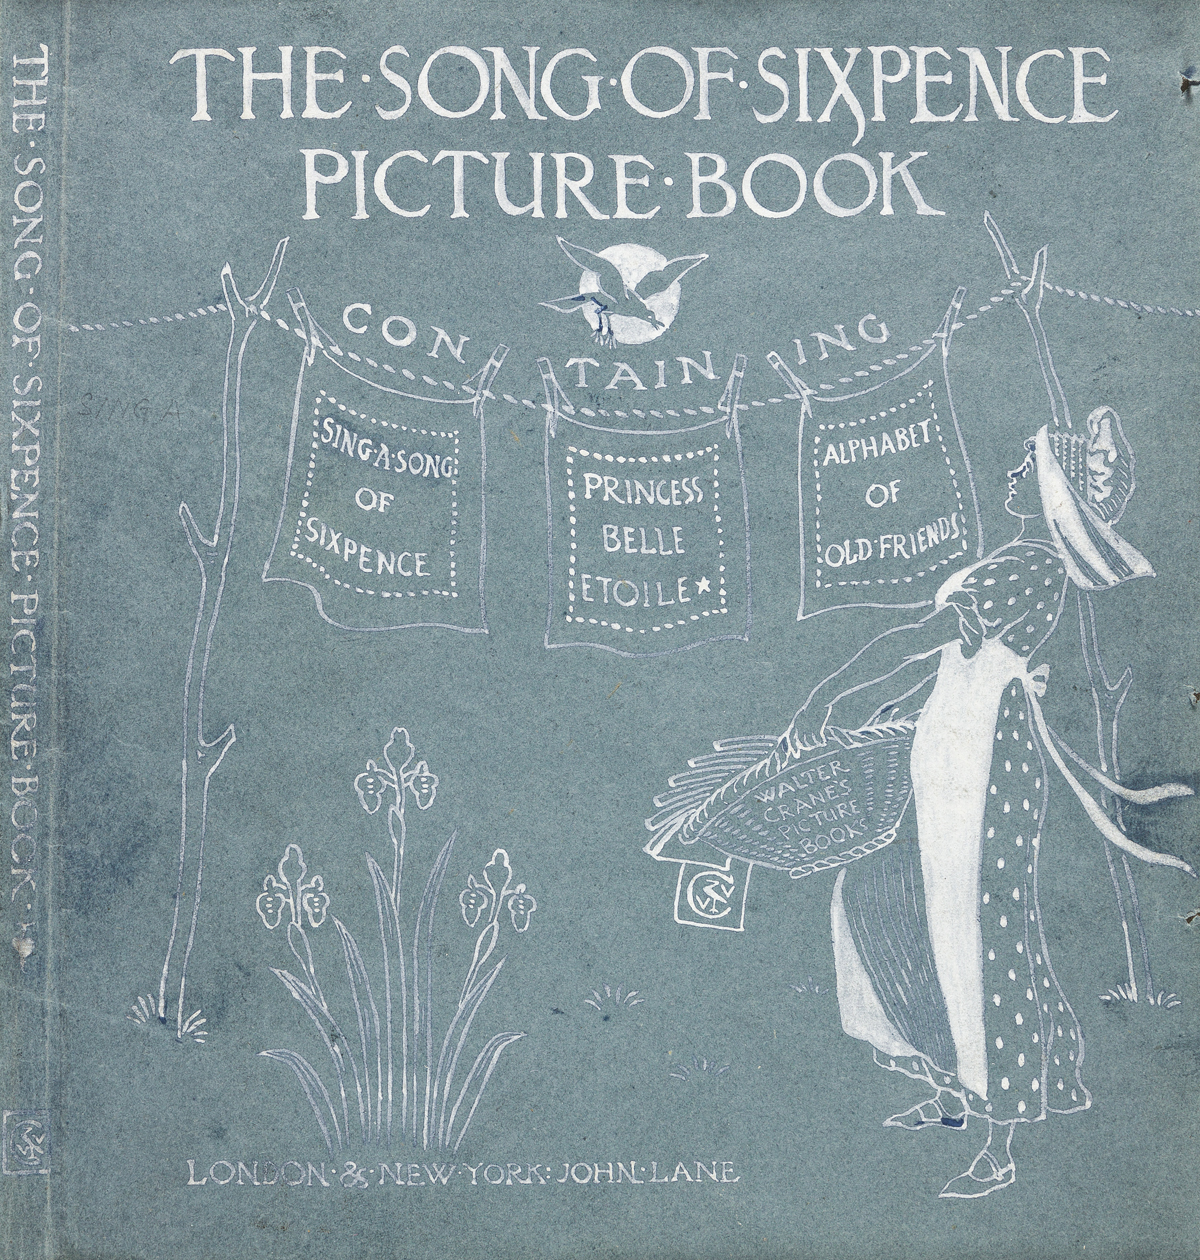 WALTER CRANE (1845-1915) The Song of Sixpence Picture Book.